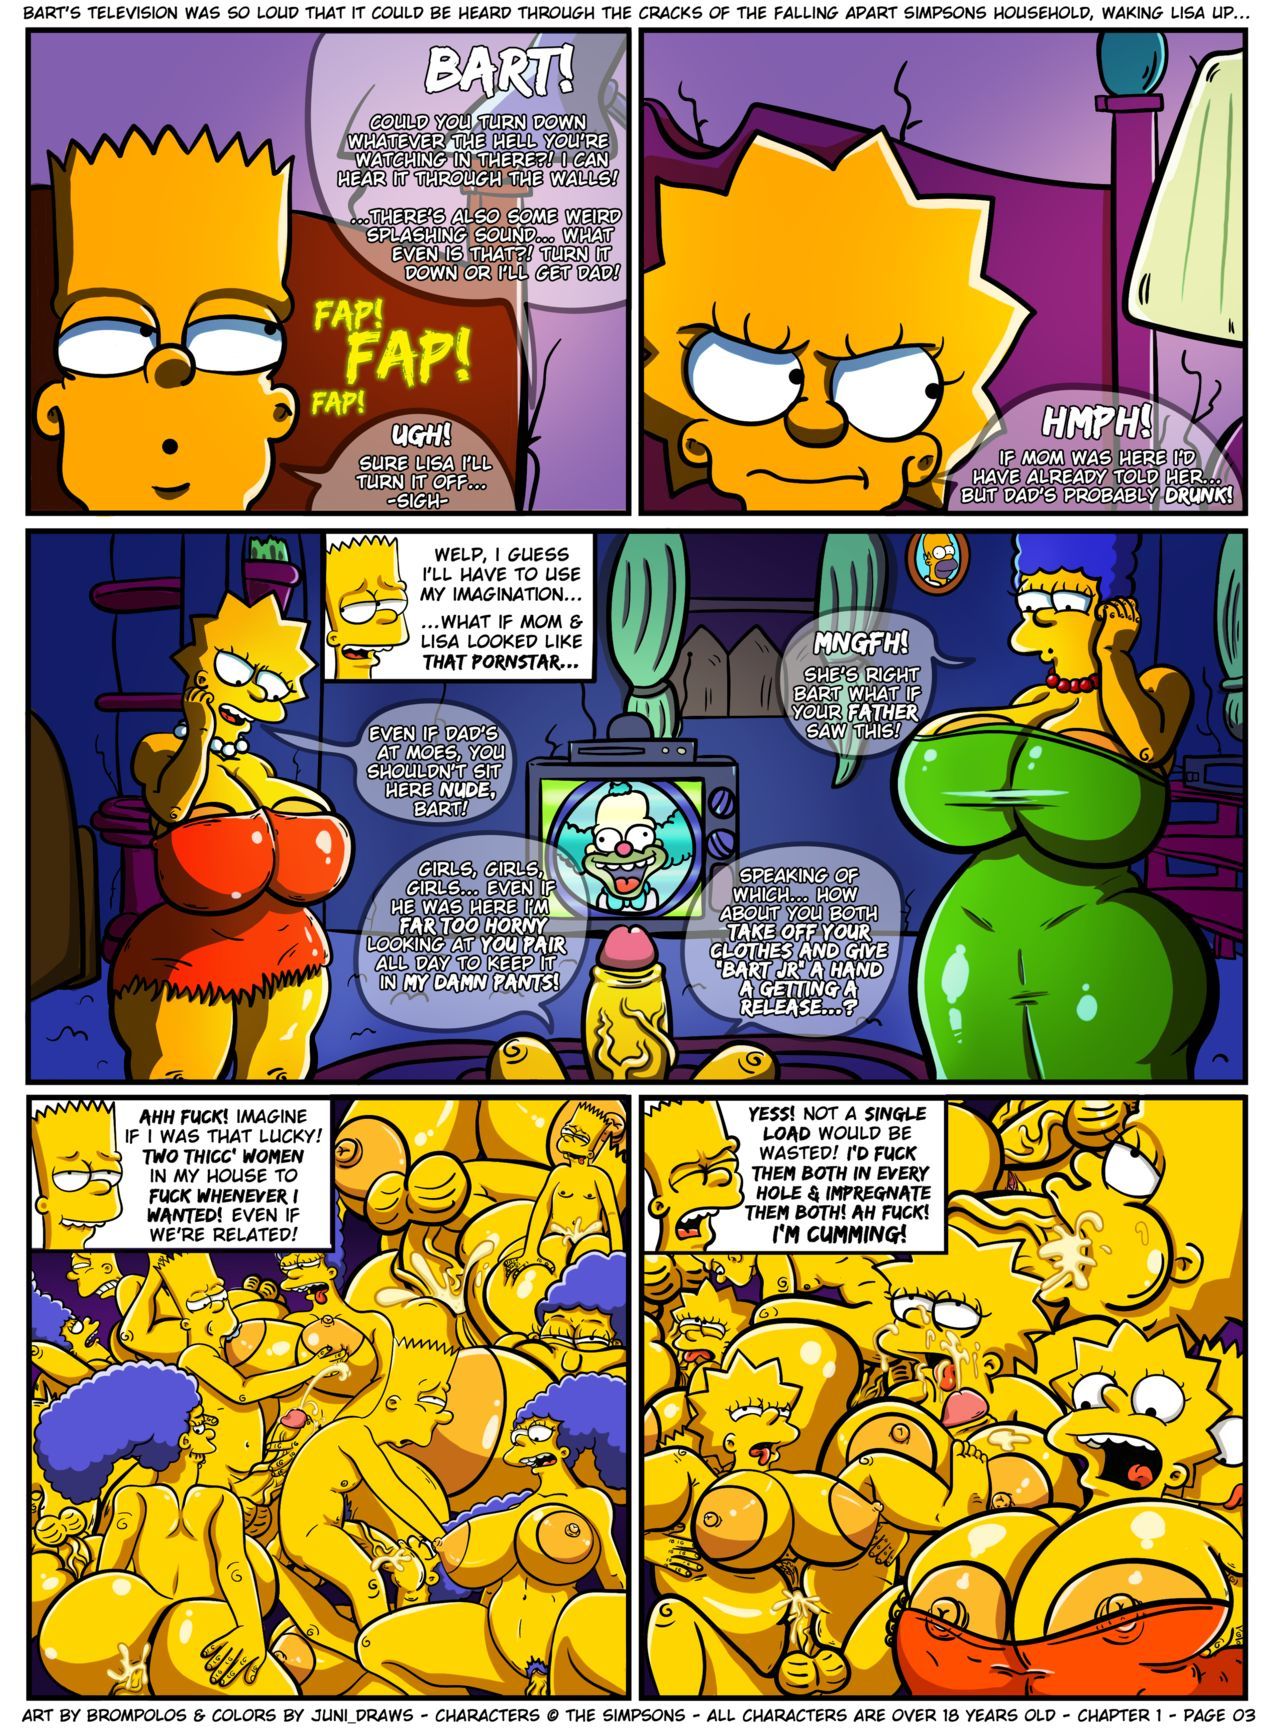 [Brompolos/Juni_Draws] The Sexensteins (Simpsons) [Ongoing] 4